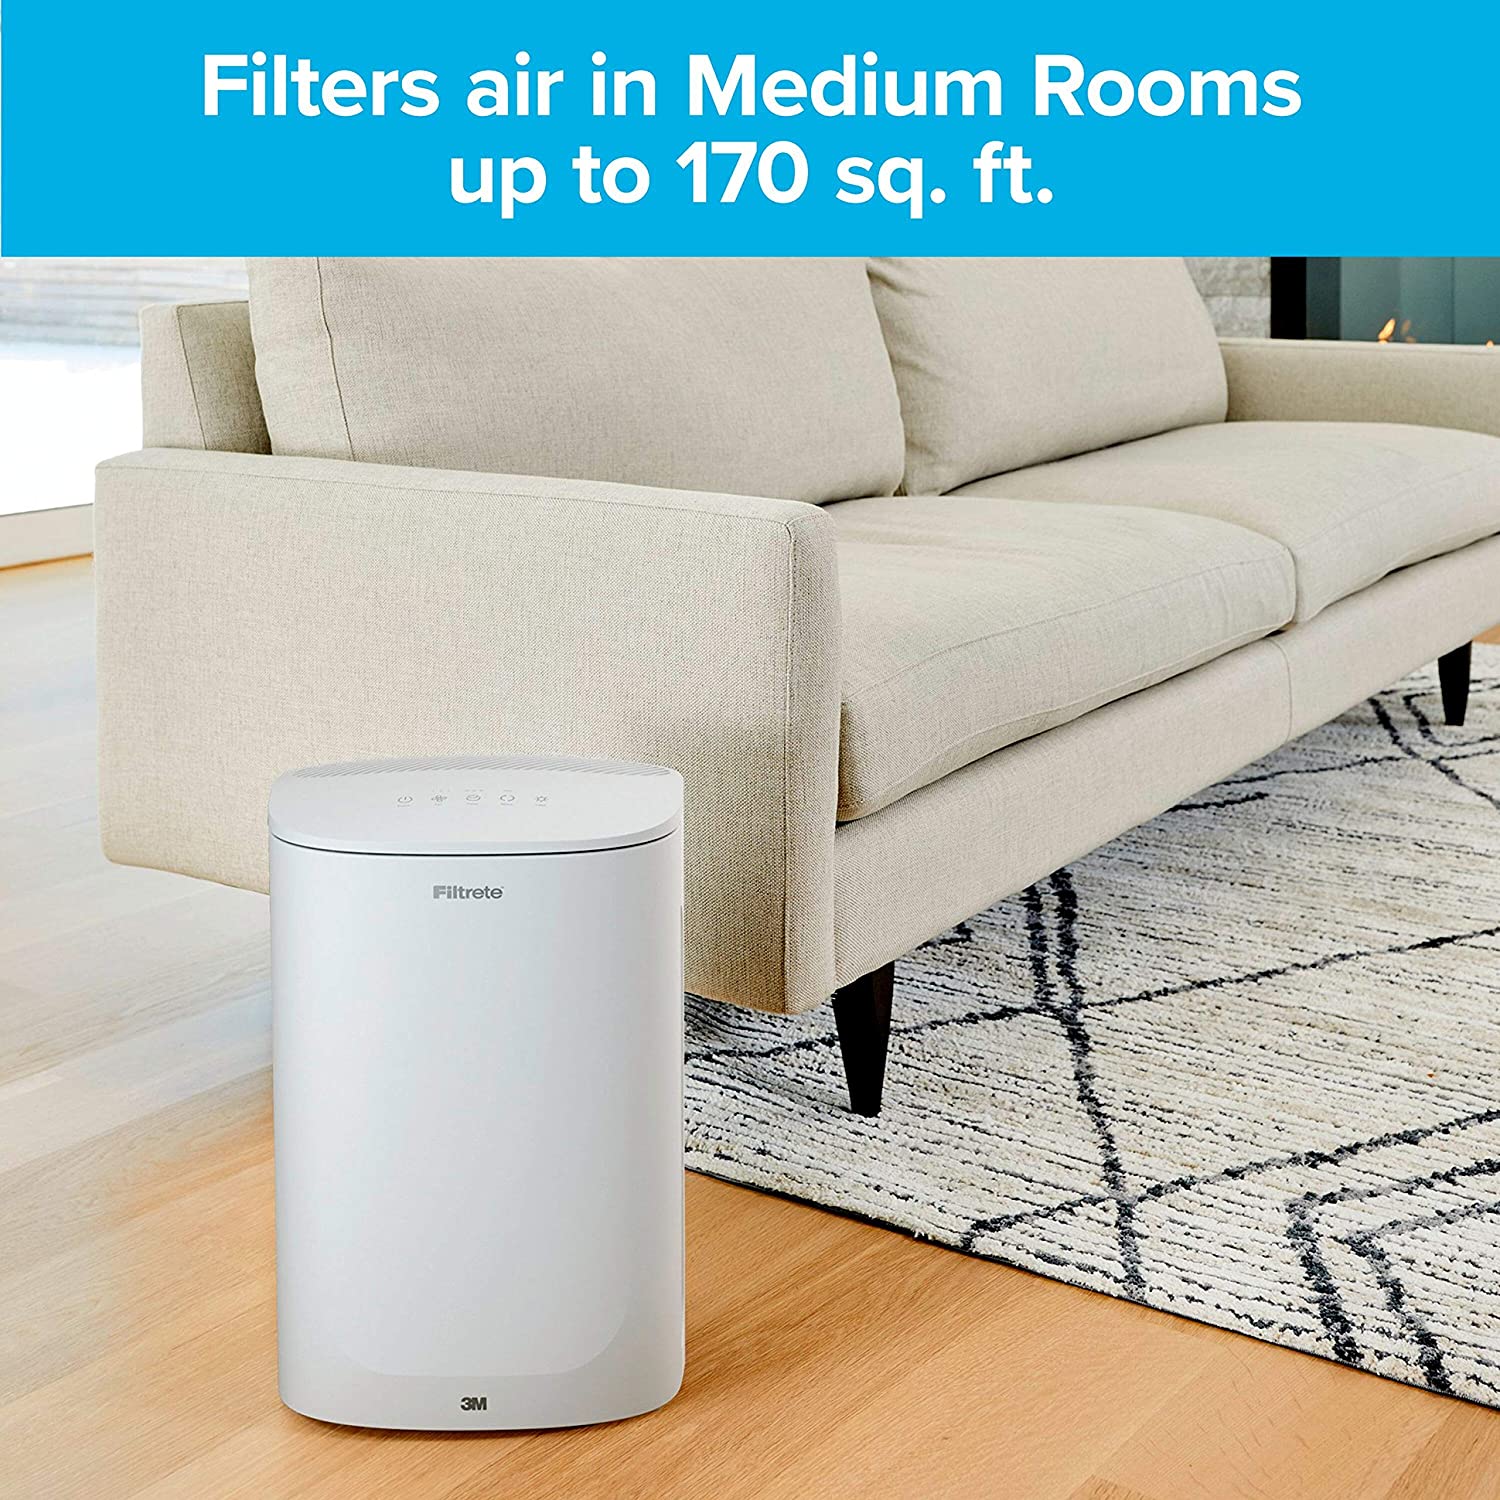 Filtrete Air Purifier, Small/Medium Room True HEPA Filter, Captures 99.97% of Airborne particles such as Smoke, Dust, Pollen, Bacteria, Virus for 150 Sq. Ft., Office, Bedroom, Kitchen and more